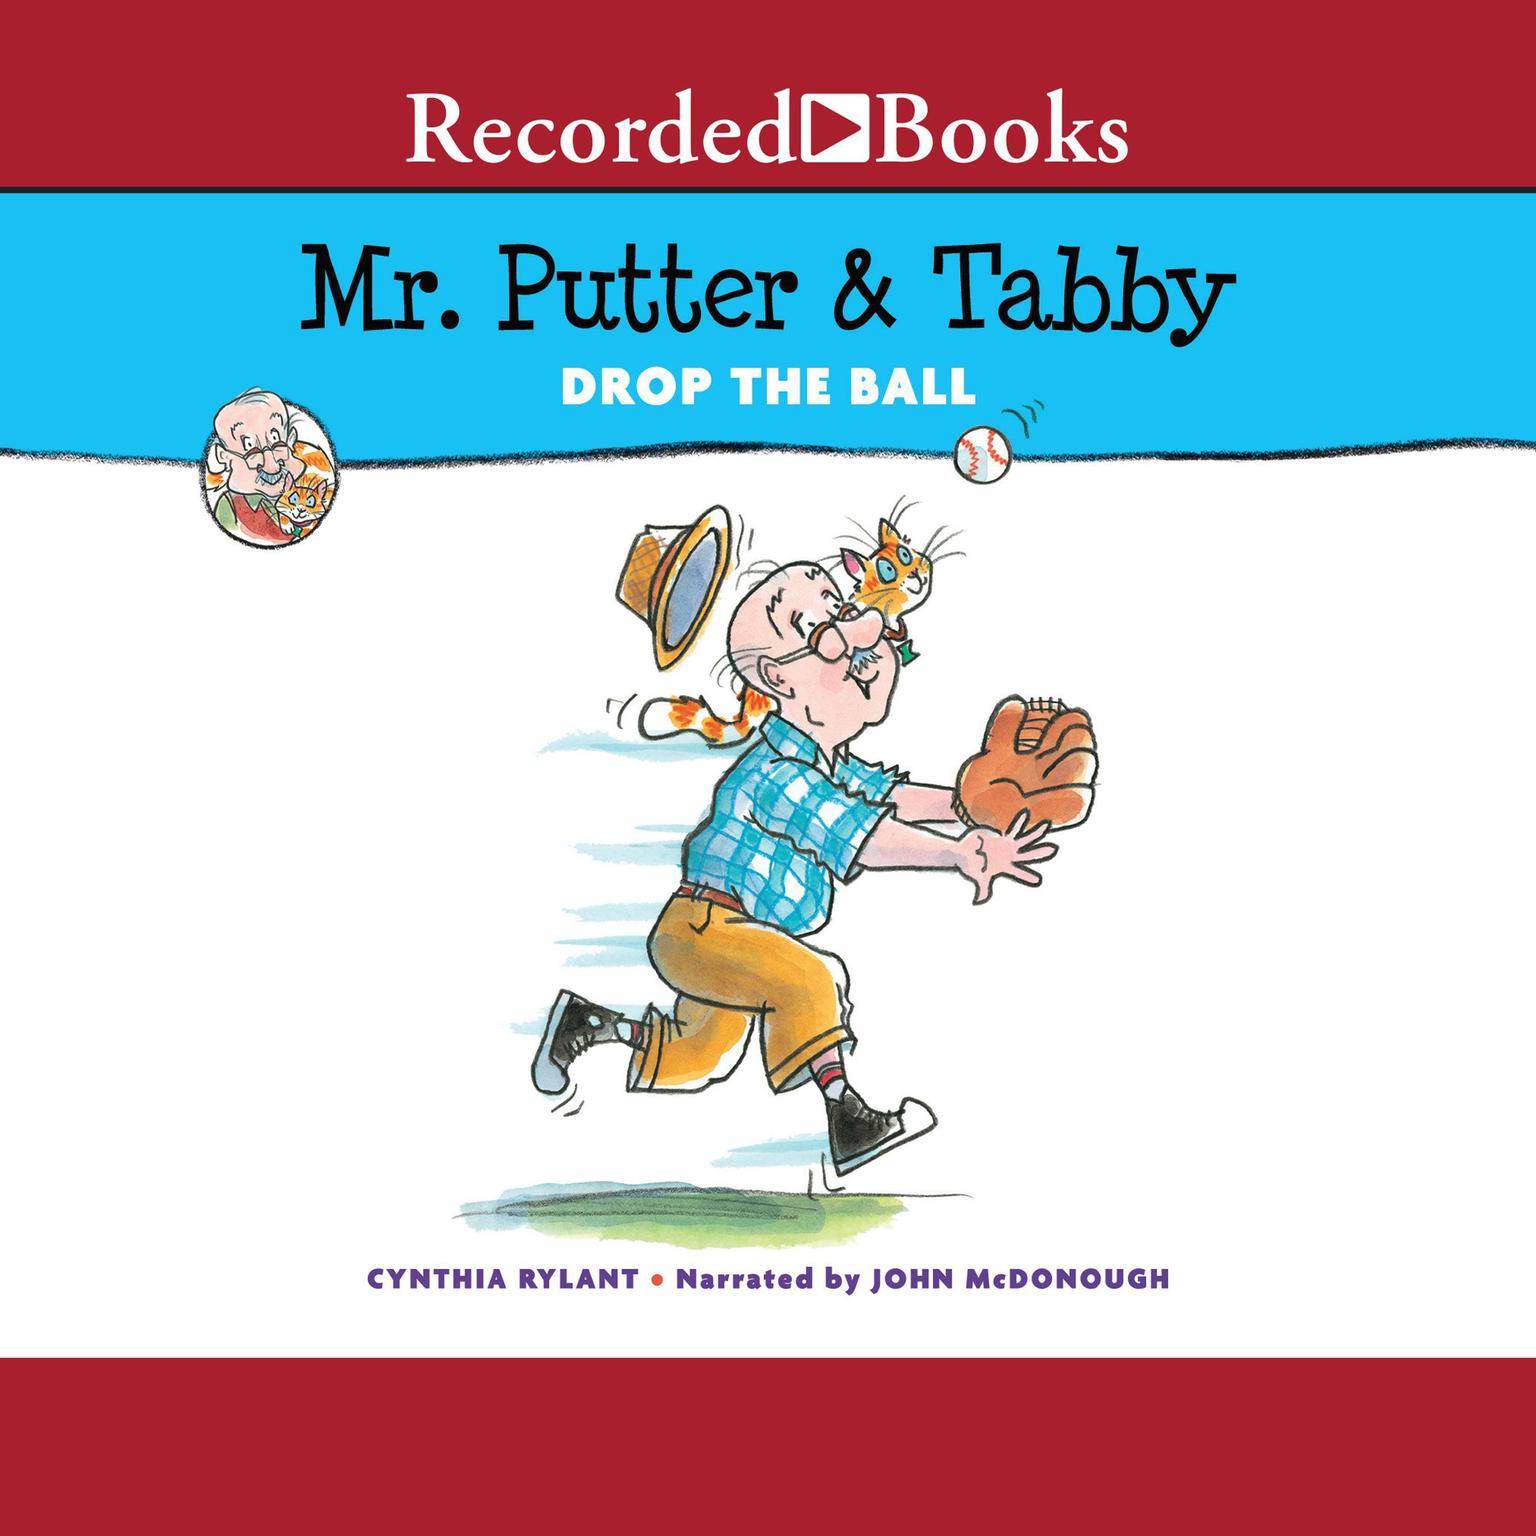 Mr. Putter & Tabby Drop the Ball Audiobook, by Cynthia Rylant